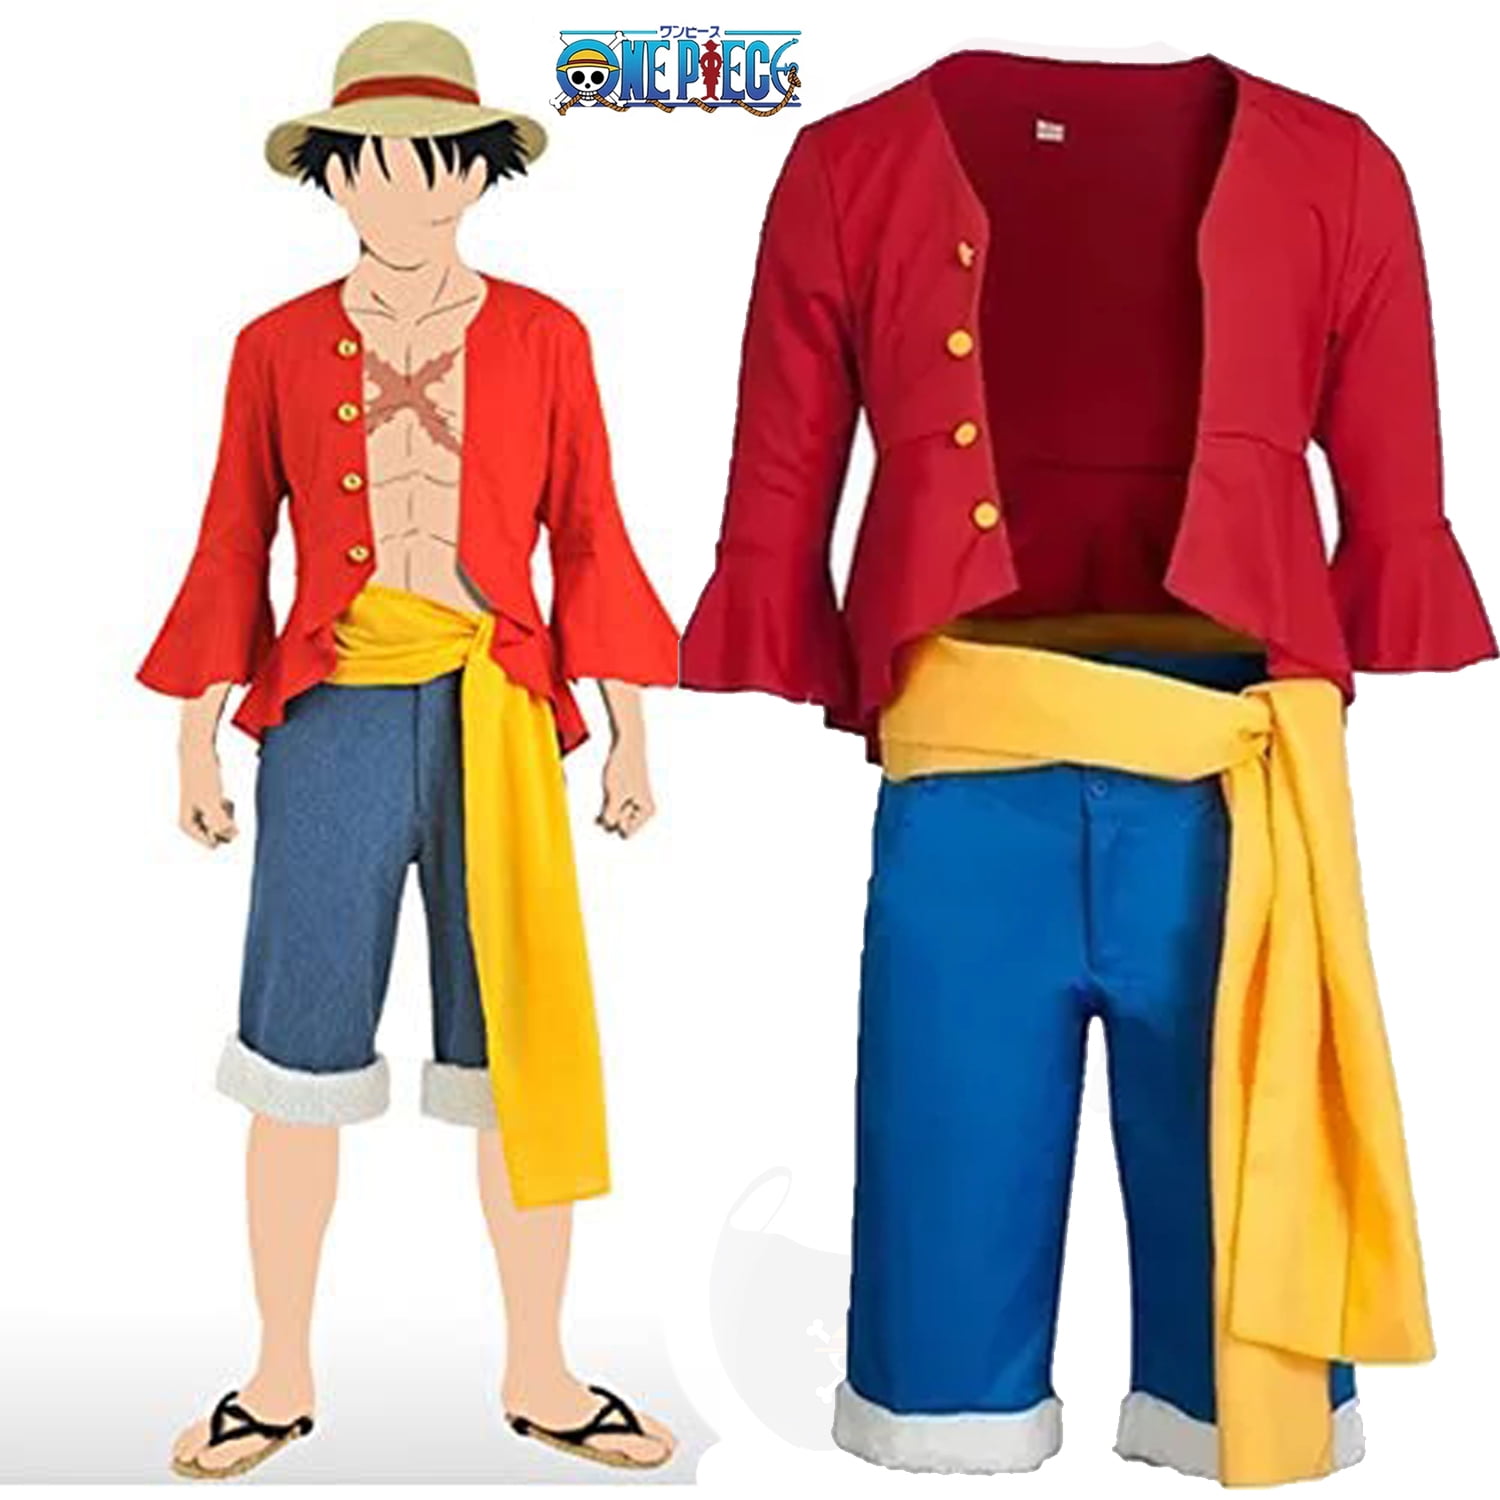 Anime Cosplay Costume for Monkey D. Luffy After 2 Years Separation Shirt  Pants Sets for Adults Summer S-XXL (XL)